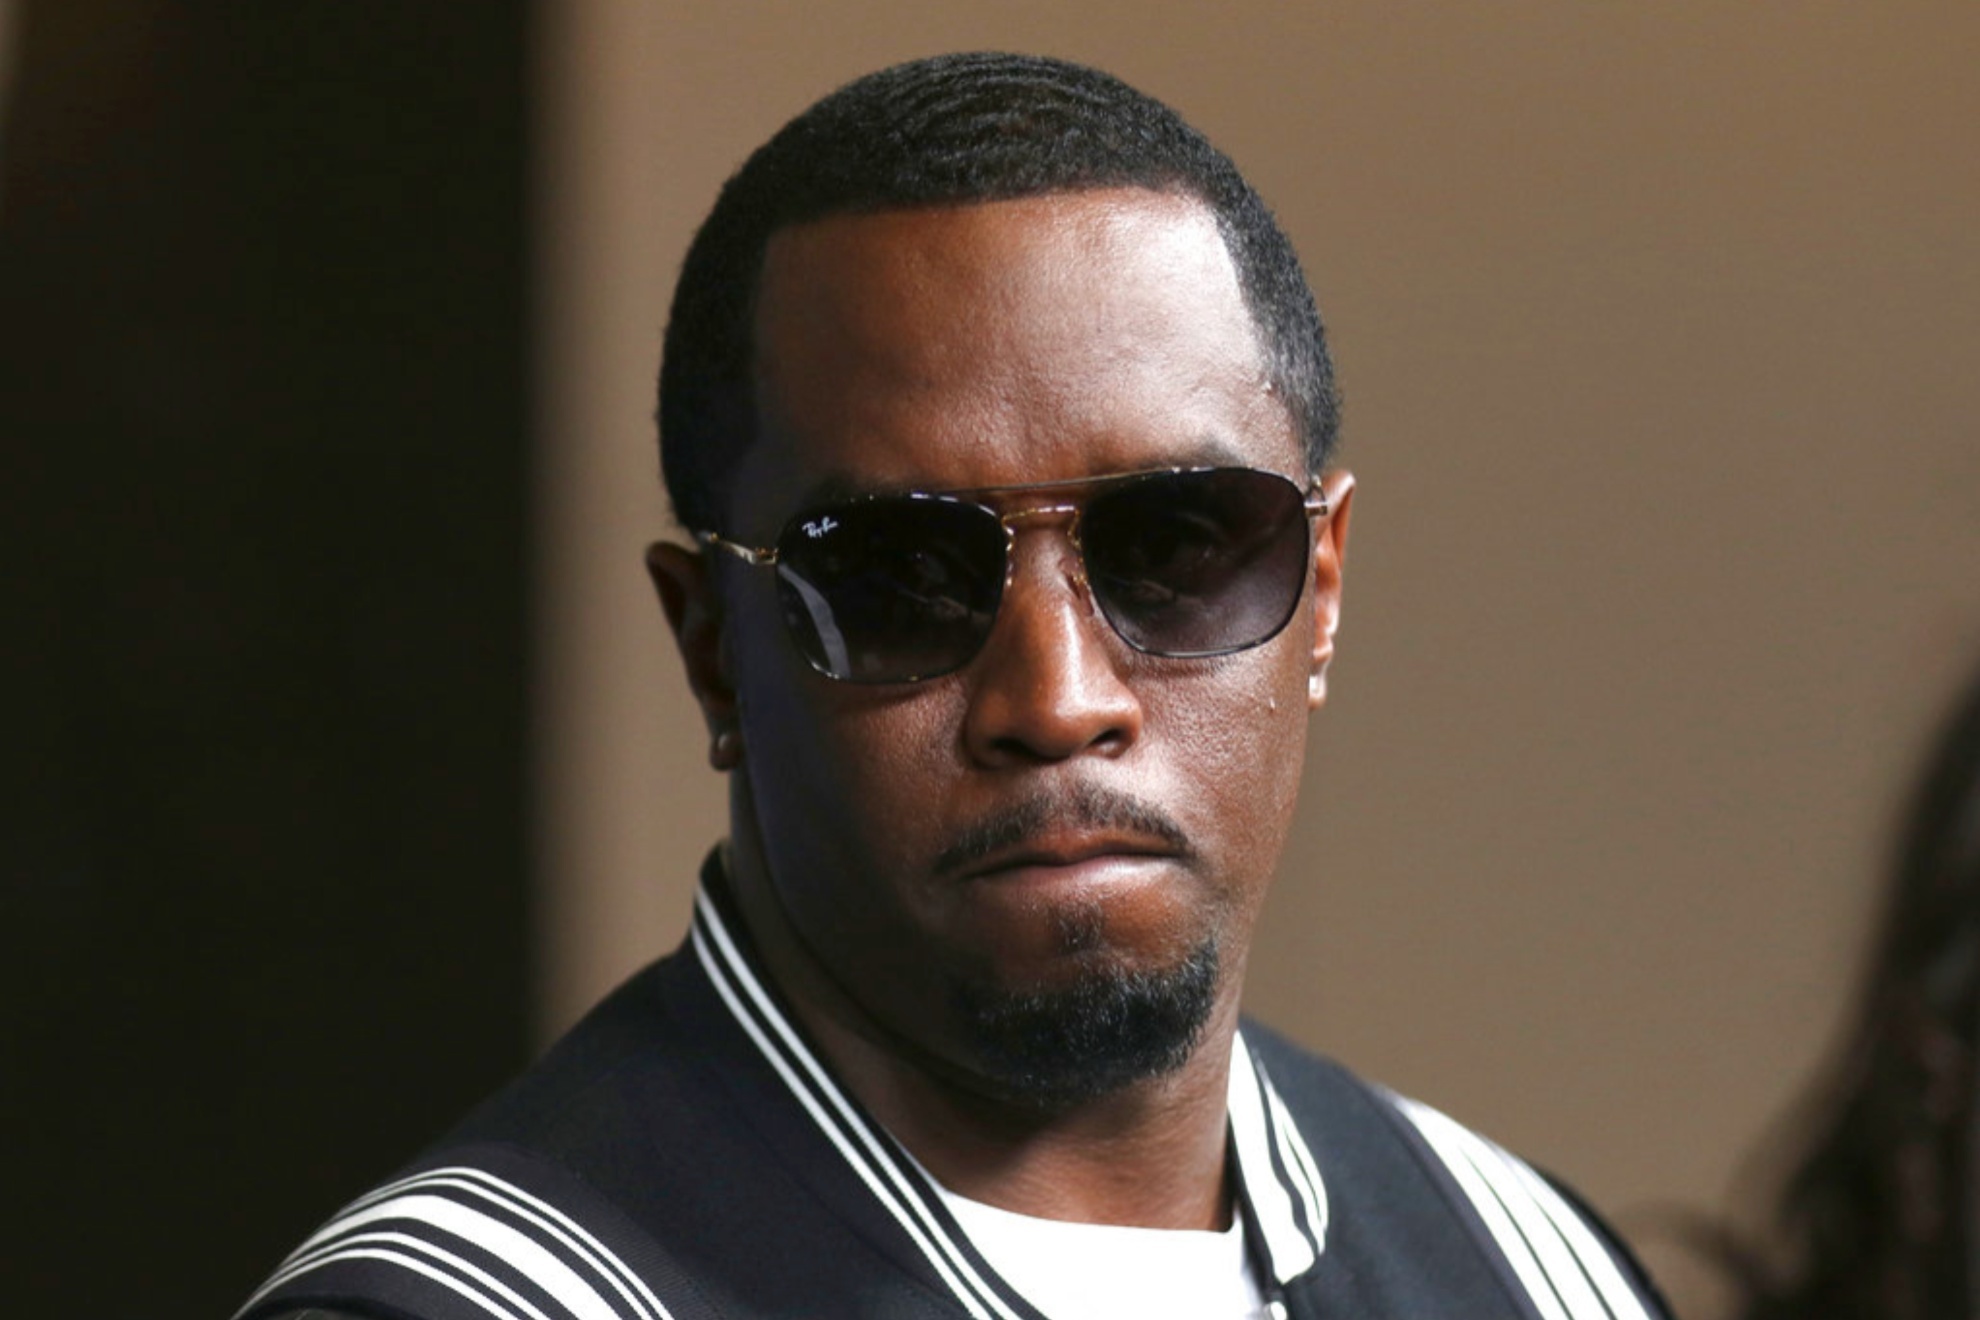 New sexual assault allegation against Sean "Diddy" Combs has emerged